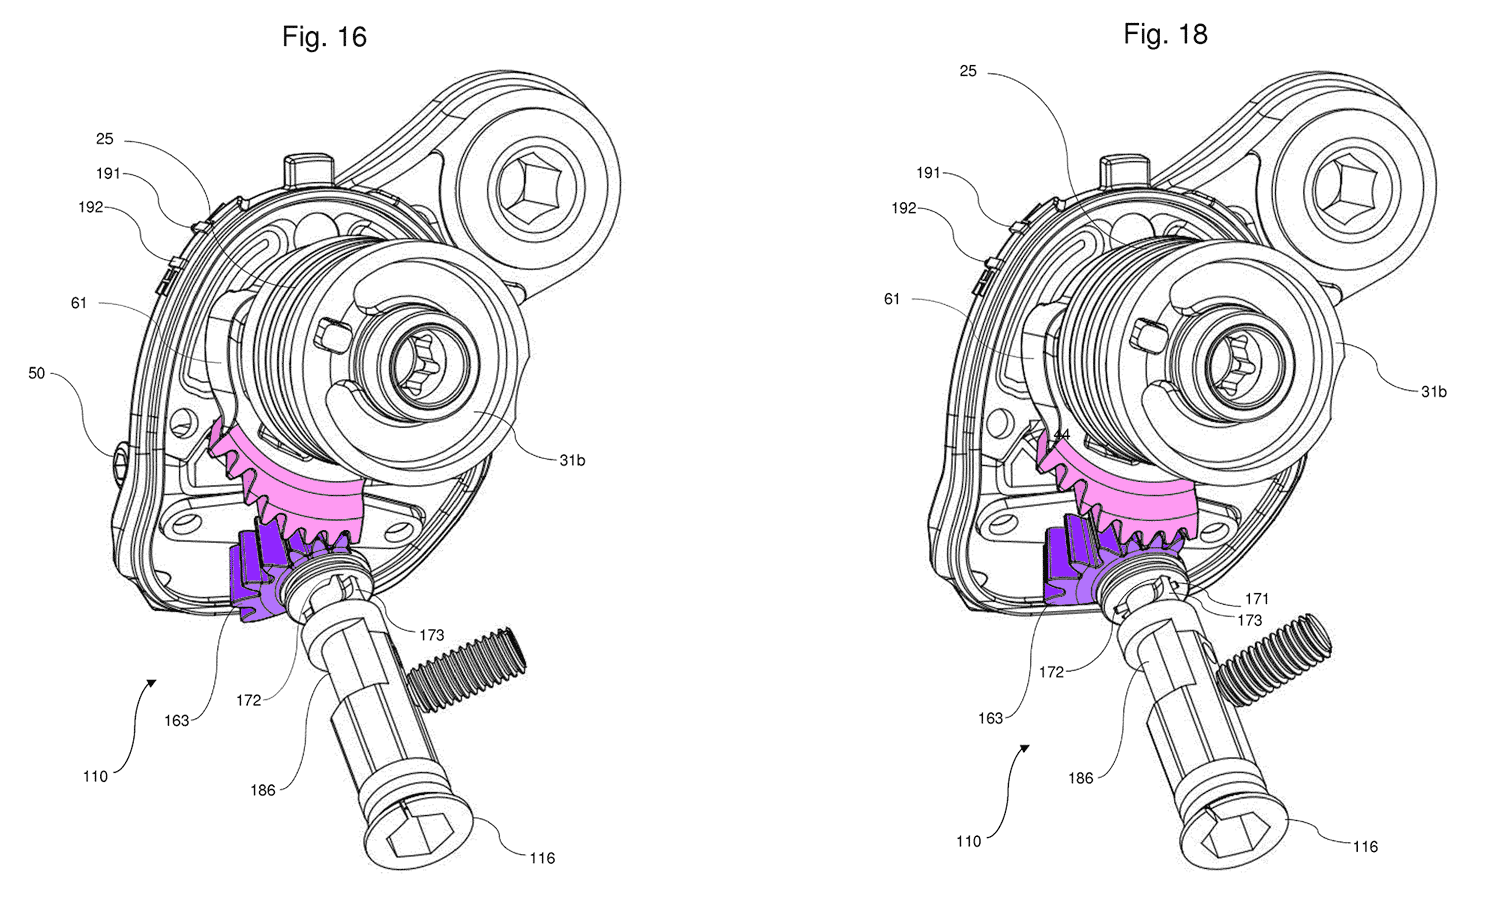 campagnolo rear derailleur internals showing complex dual movement to control upper pulley positioning